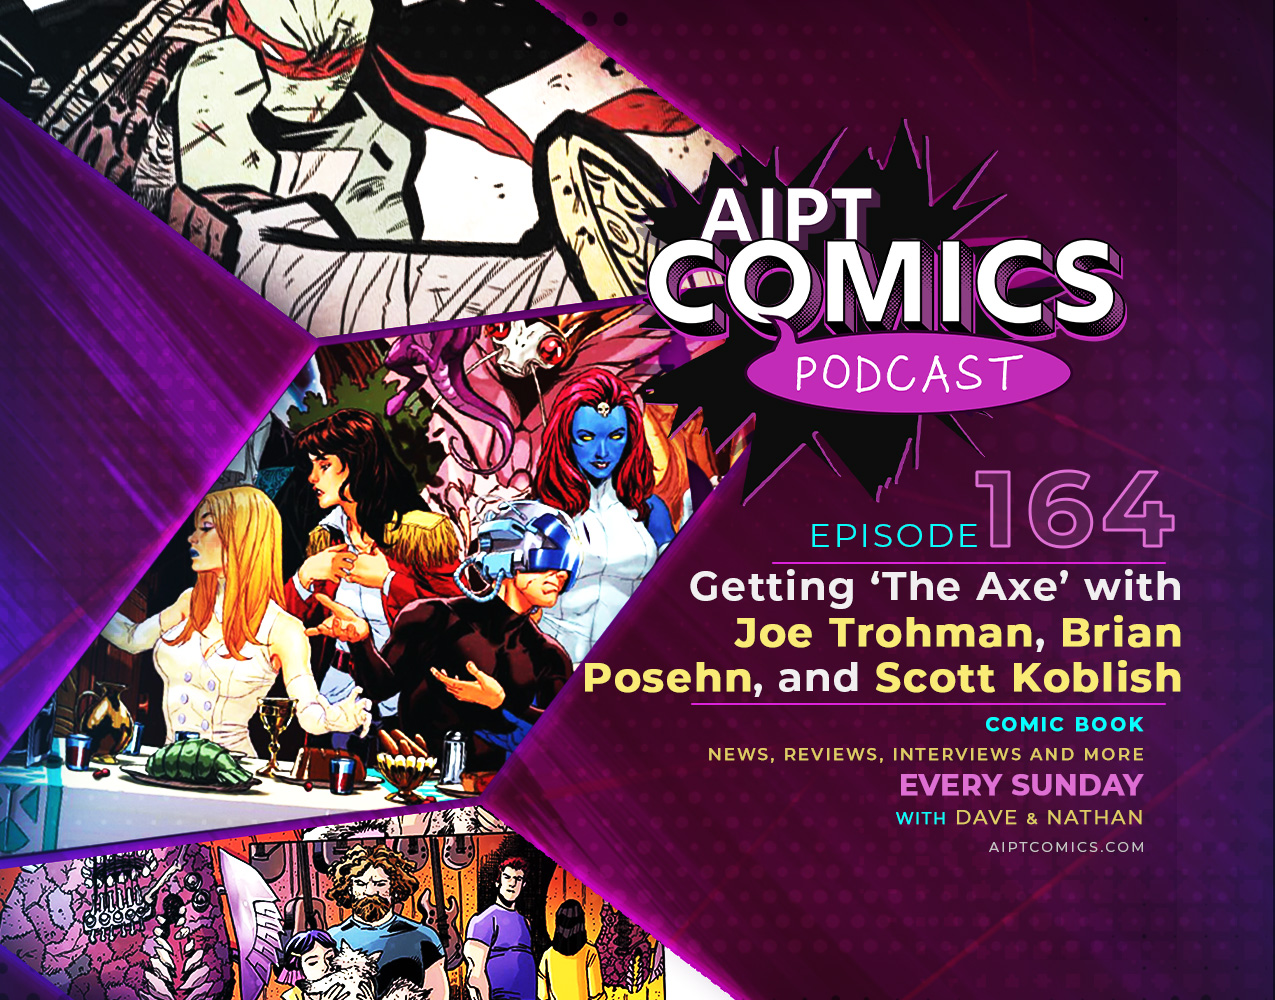 AIPT Comics podcast episode 164: Getting ‘The Axe’ with Joe Trohman, Brian Posehn, and Scott Koblish